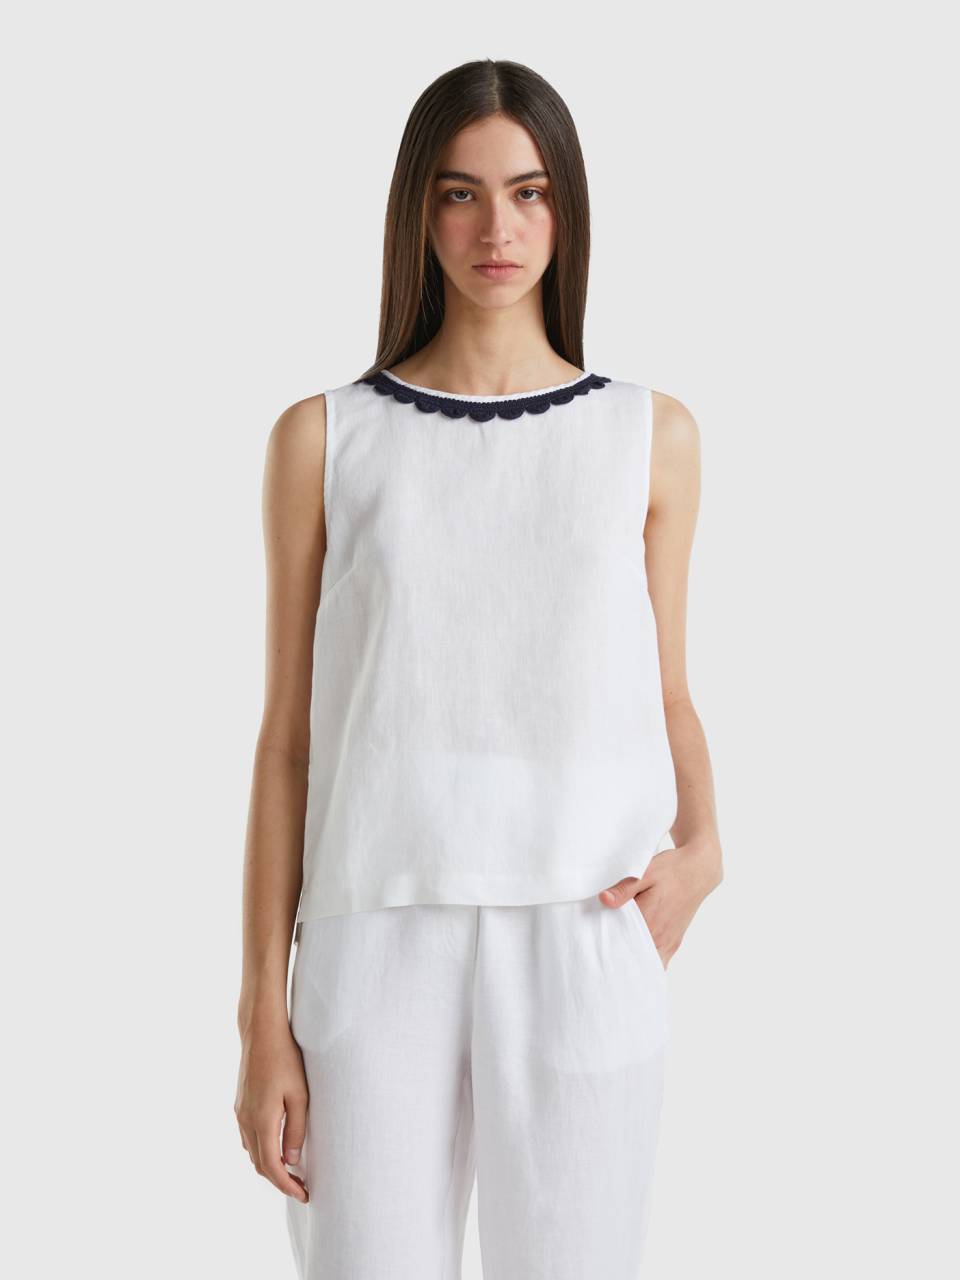 Benetton blouse in pure linen with crochet details. 1